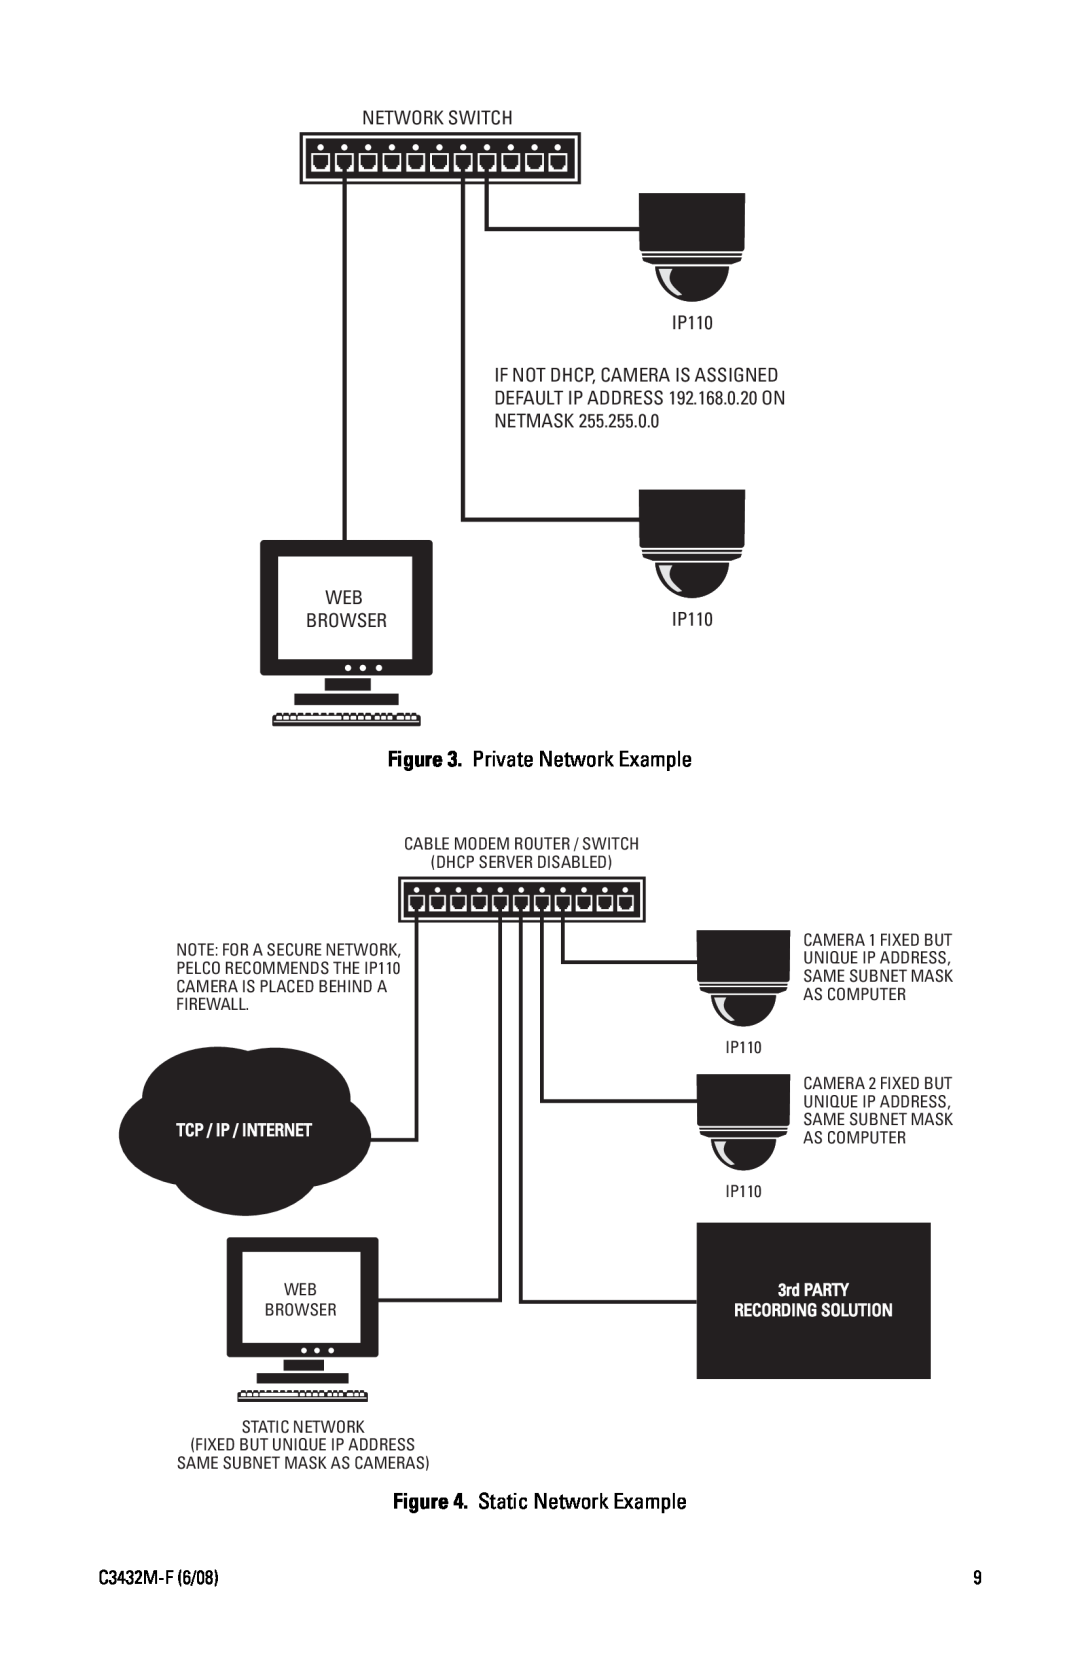 Pelco C3432M-F Private Network Example, Static Network Example, NETWORK SWITCH IP110, If Not Dhcp, Camera Is Assigned 